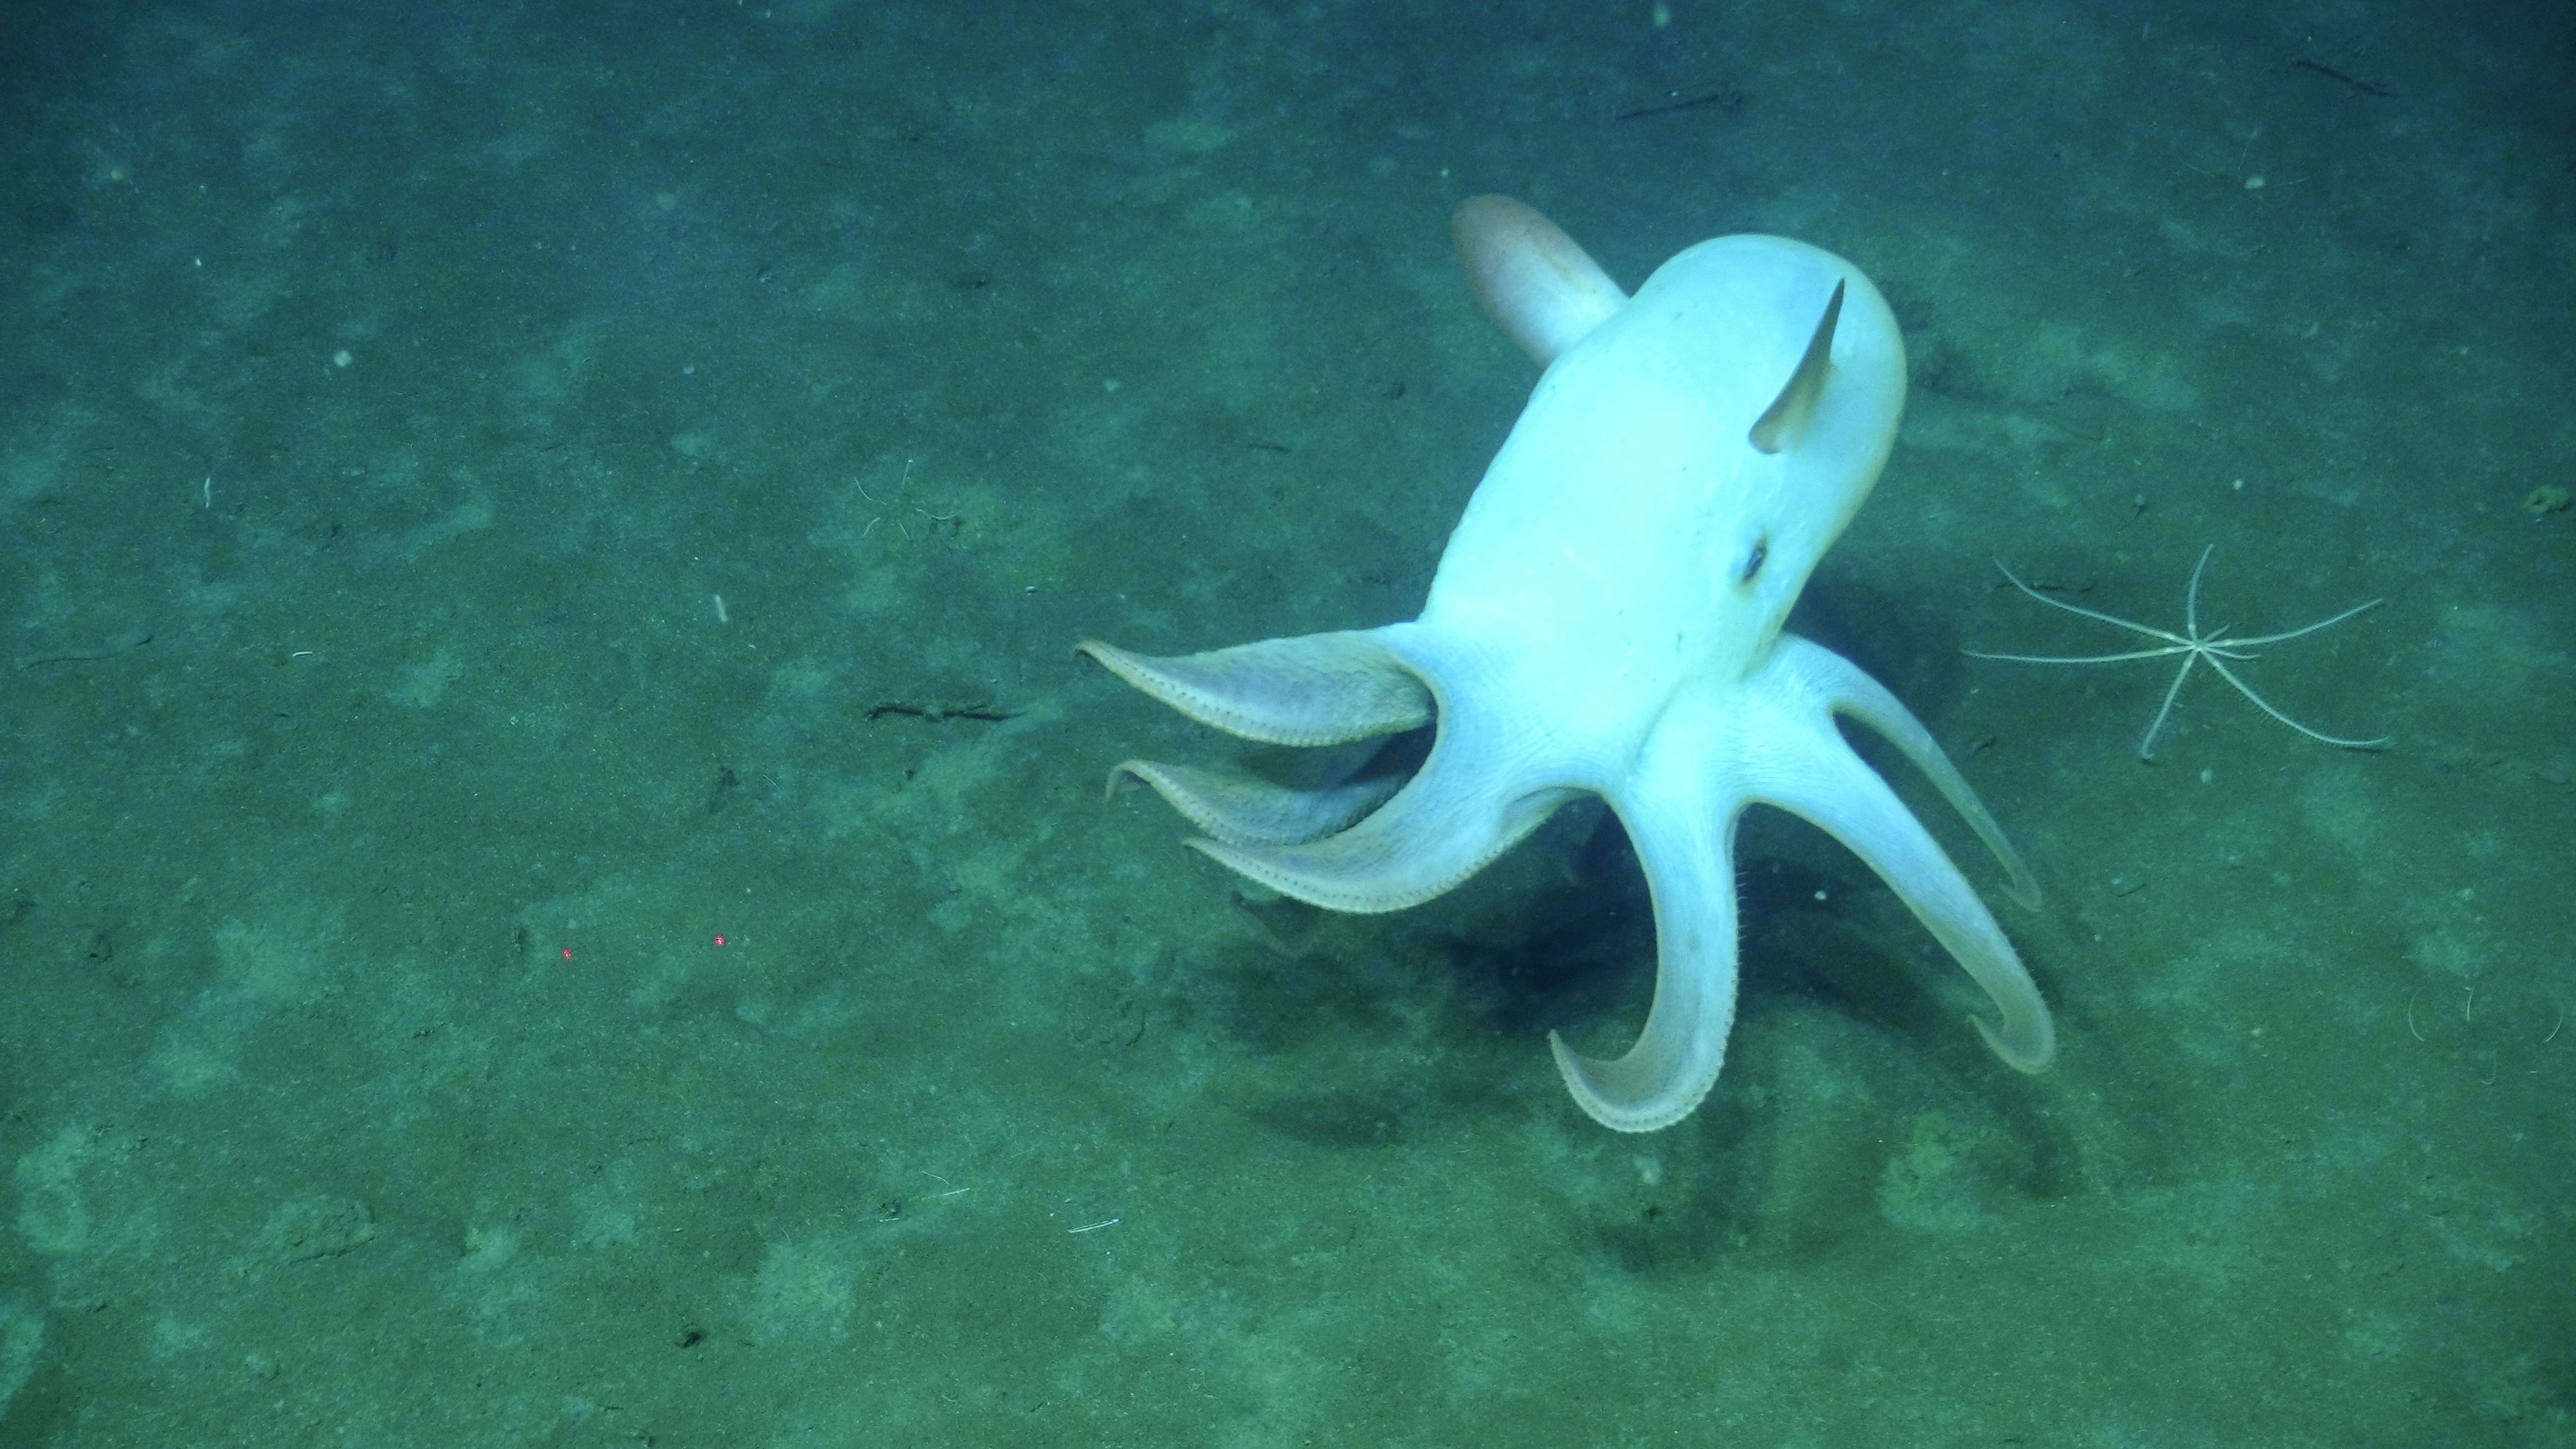 ID: white small octopus with elephant -like ears floats on seafloor